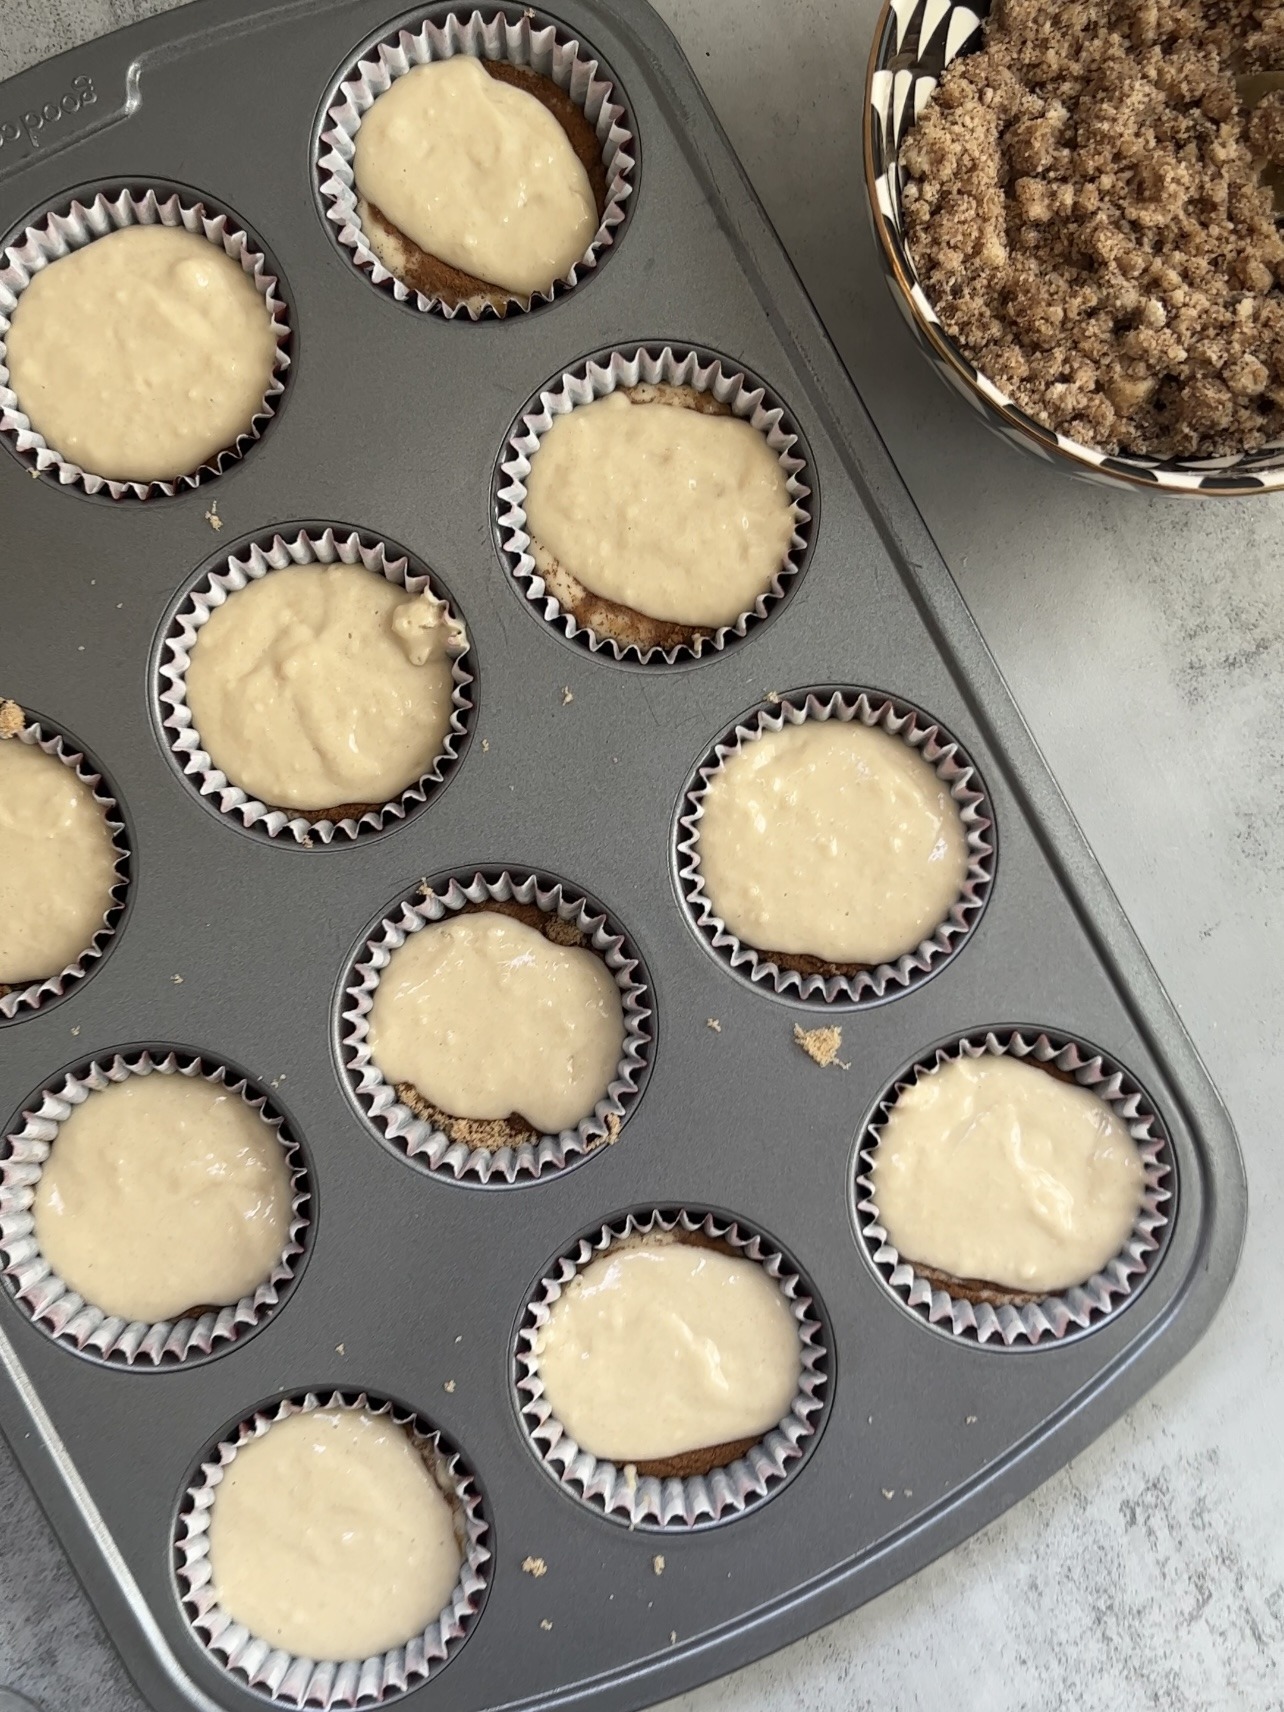 adding the streusel on top of each of the coffee cake cupcakes